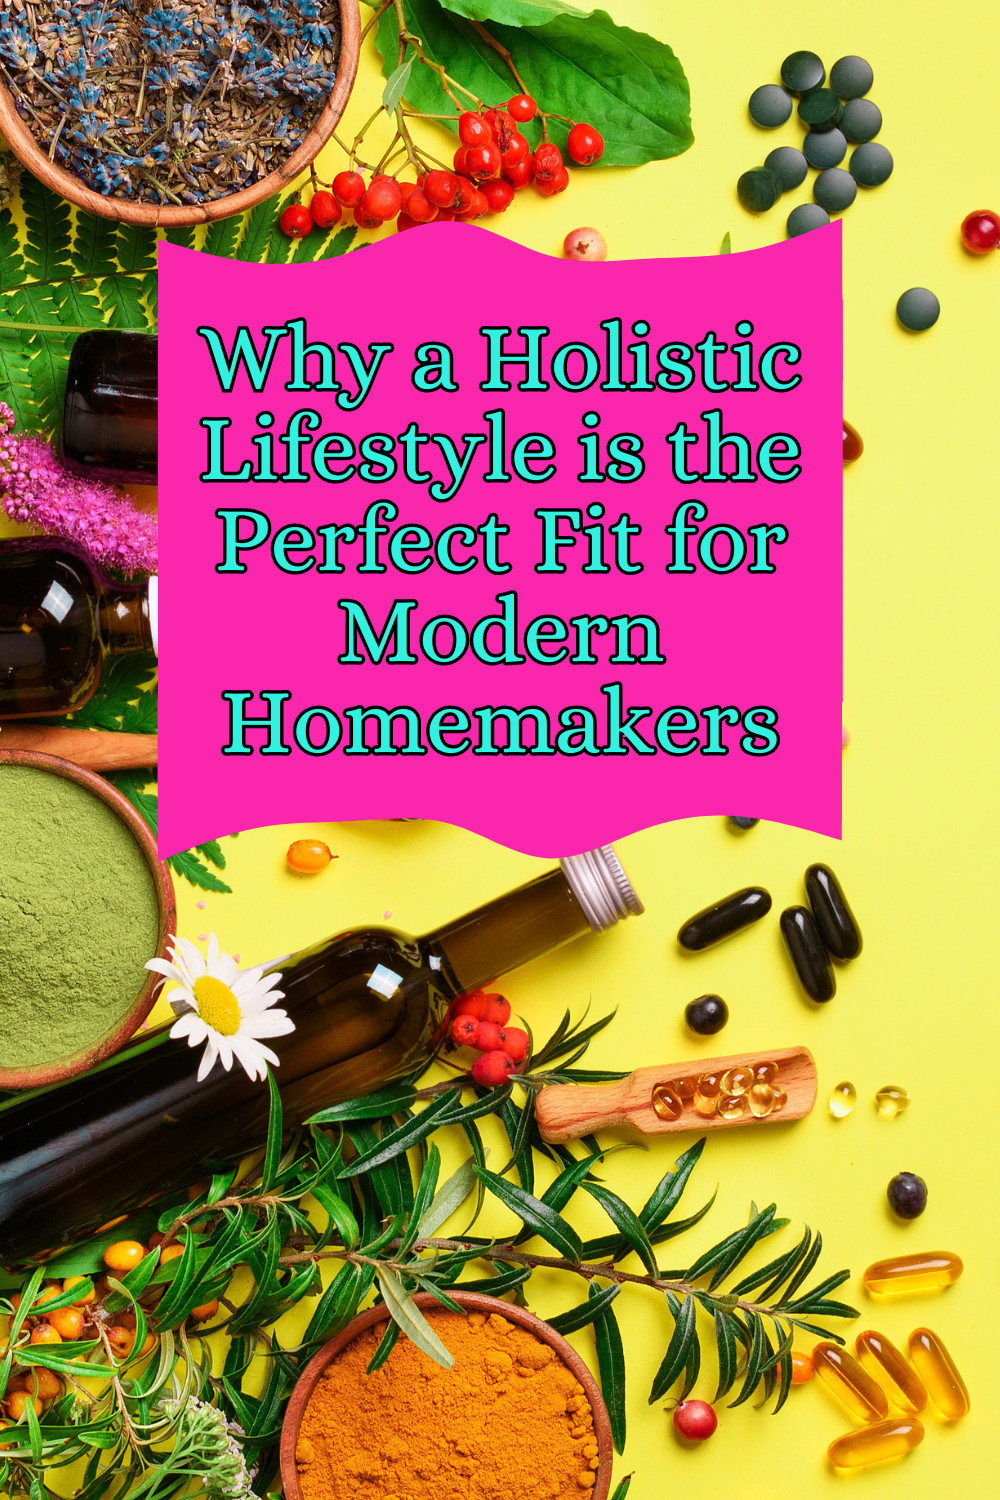 Why a Holistic Lifestyle is the Perfect Fit for Modern Homemakers